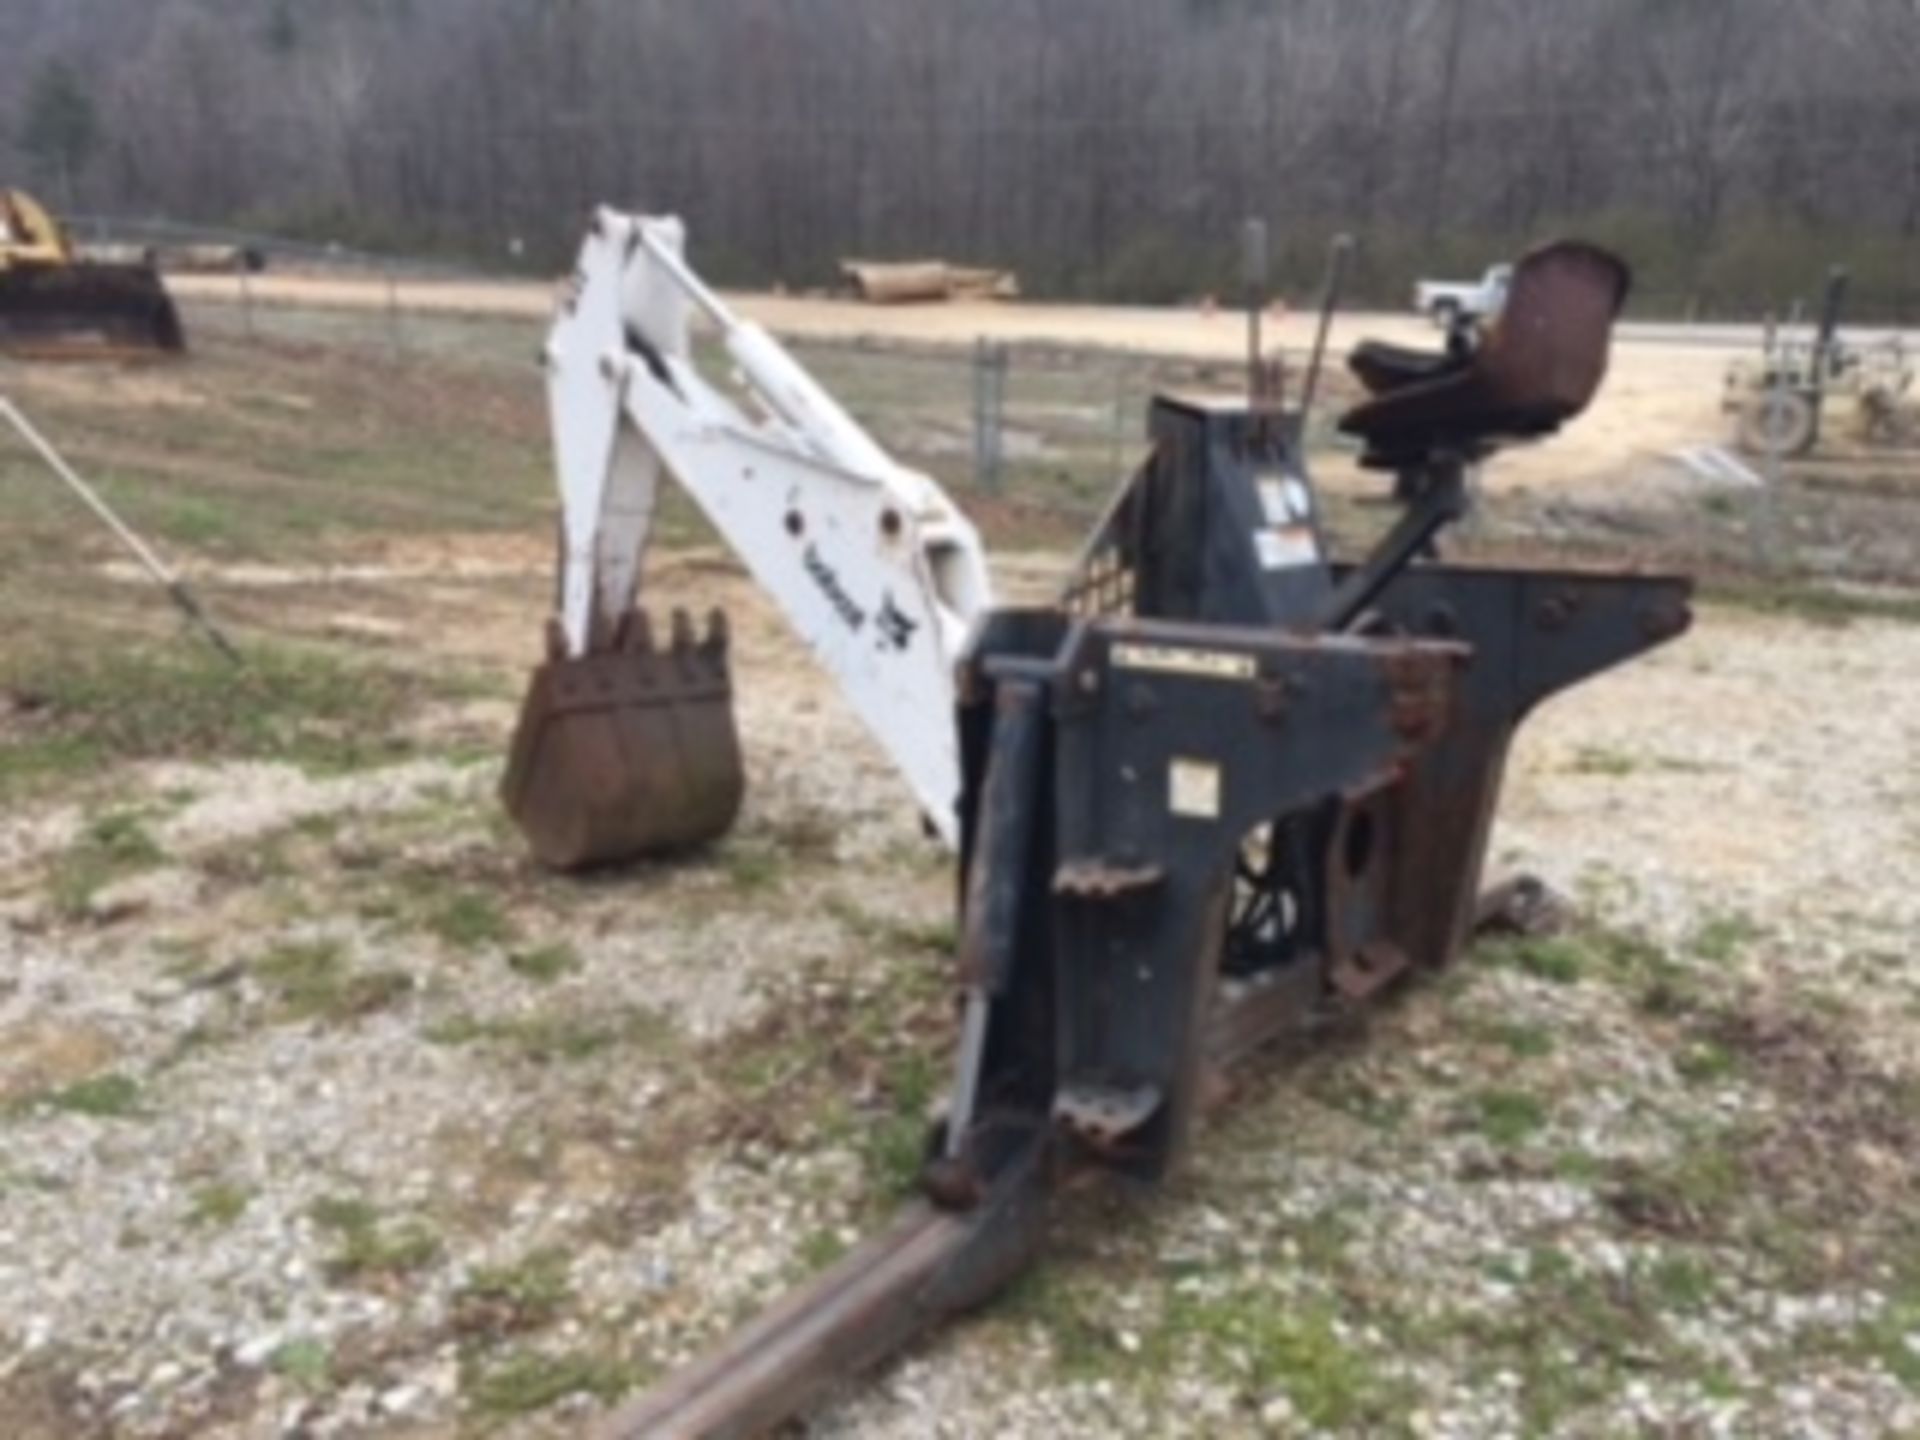 Bobcat 811 Backhoe Attachment, S/N 14854, Item Location - 376 Morgan County Hwy. Harriman - Image 2 of 2